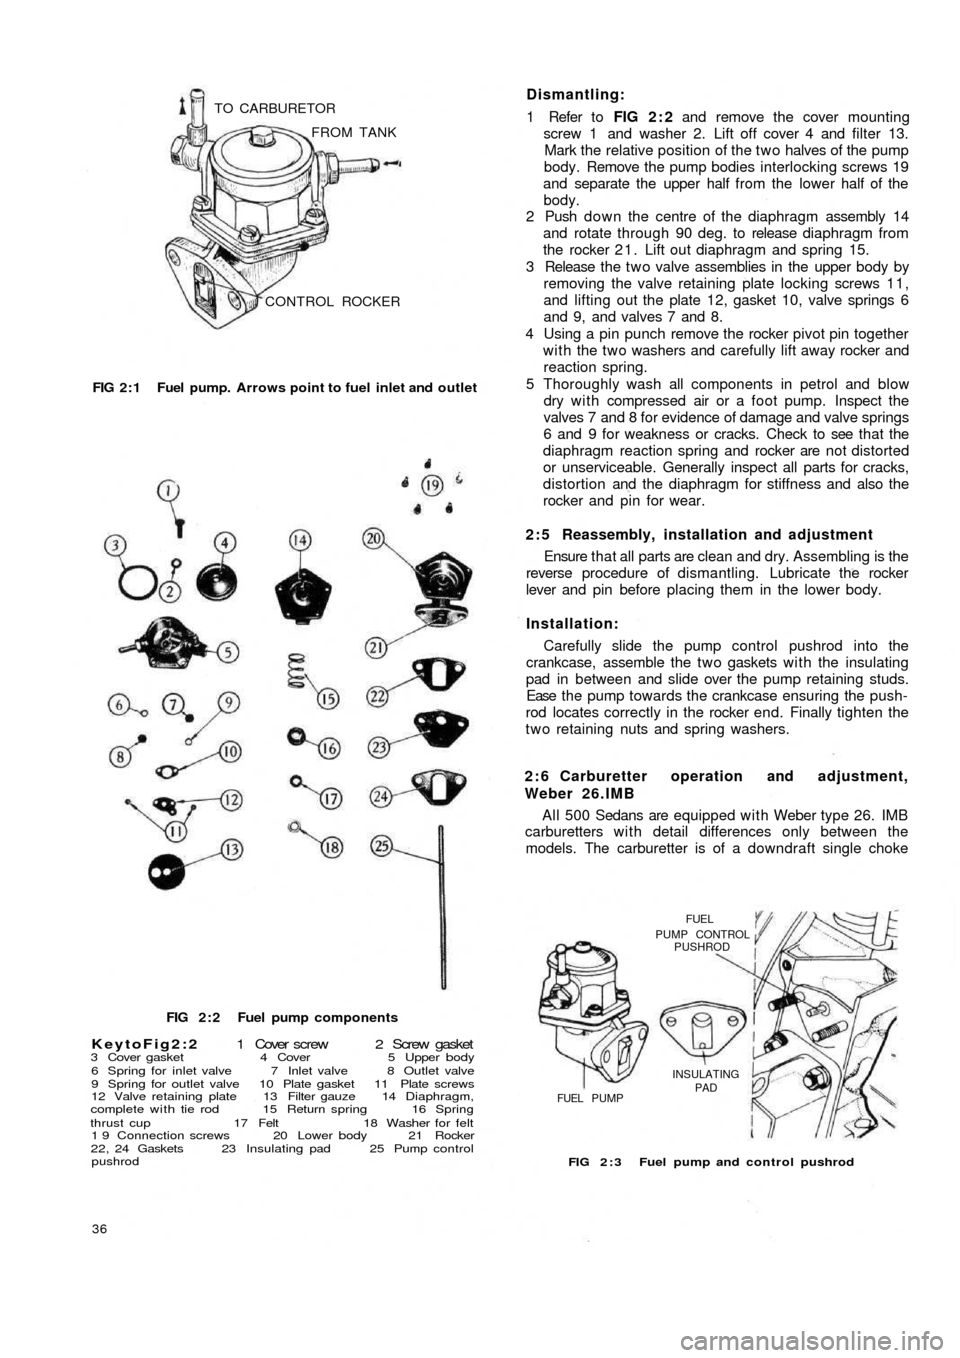 FIAT 500 1971 1.G Workshop Manual CONTROL ROCKER FROM TANK TO CARBURETOR
FIG 2 : 1  Fuel pump. Arrows point to fuel  inlet and outlet
FIG 2 : 2  Fuel pump components
KeytoFig2:2 1  Cover  screw  2  Screw  gasket3 Cover gasket 4 Cover 